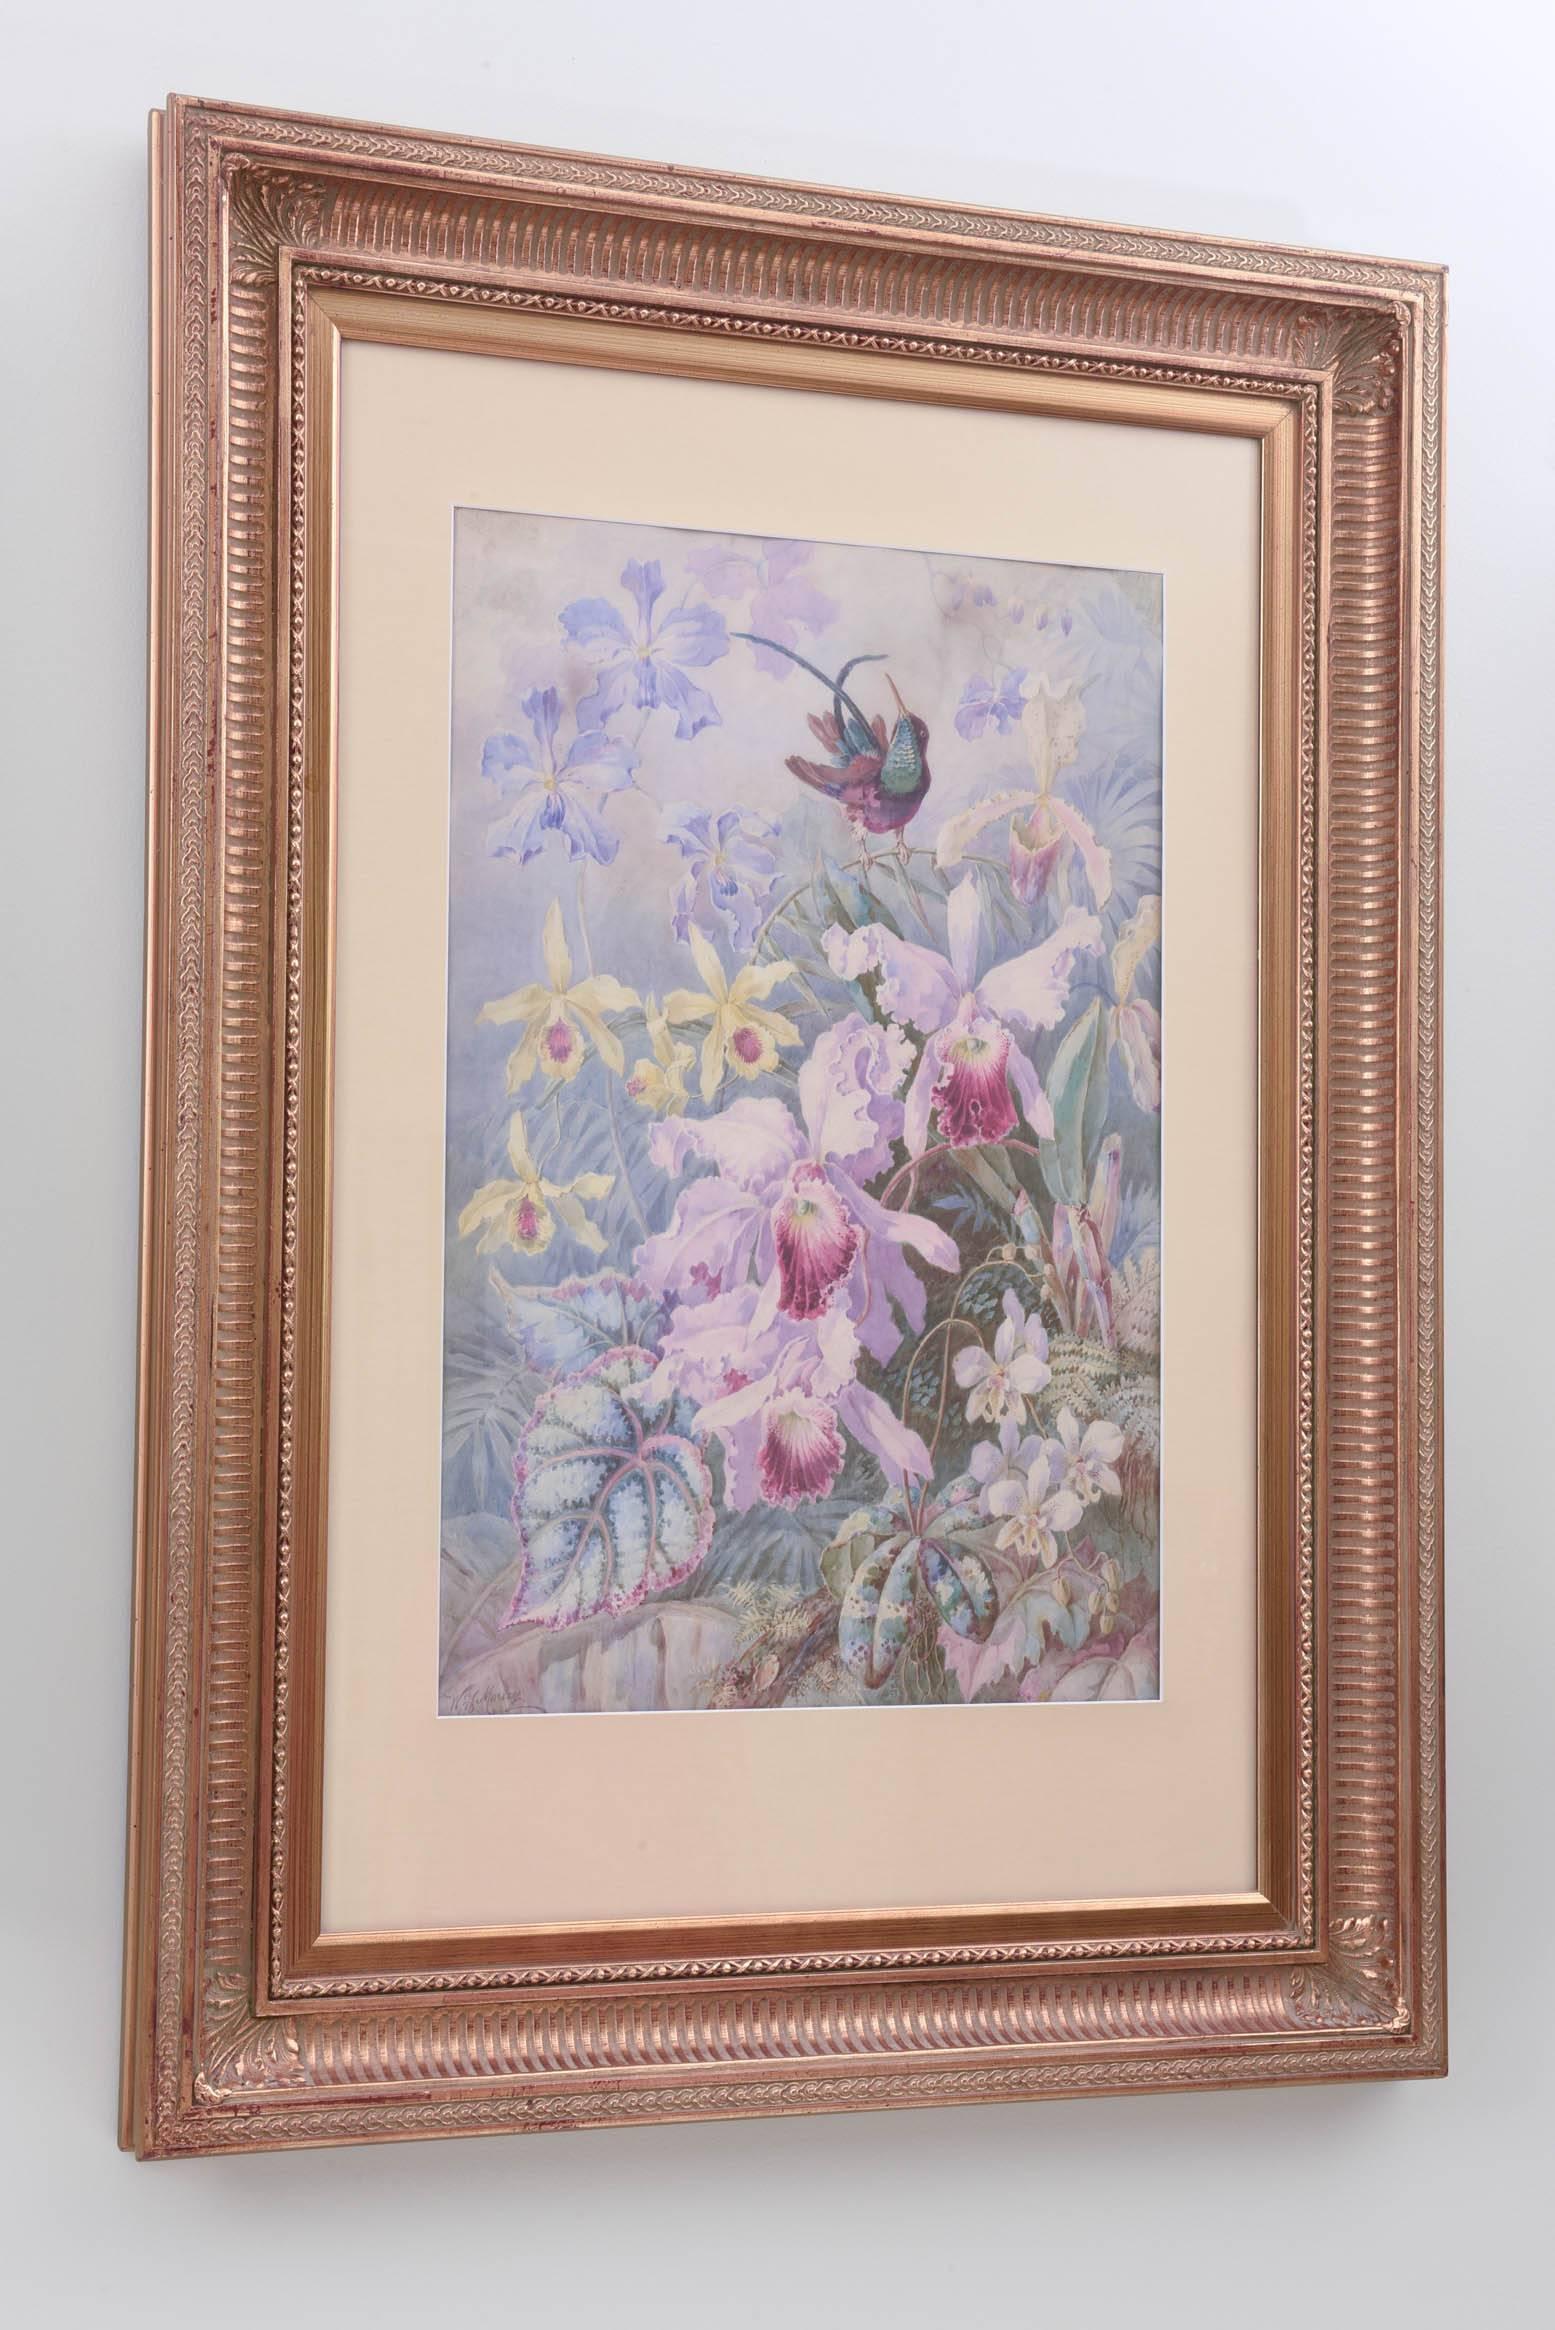 You will not be disappointed in this wonderfully hand painted piece by the world reknown William Morley. Retaining its original Gilded Age frame and in very nice condition. A watercolor of a humming bird nestled amongst its favorite orchids. Lush,